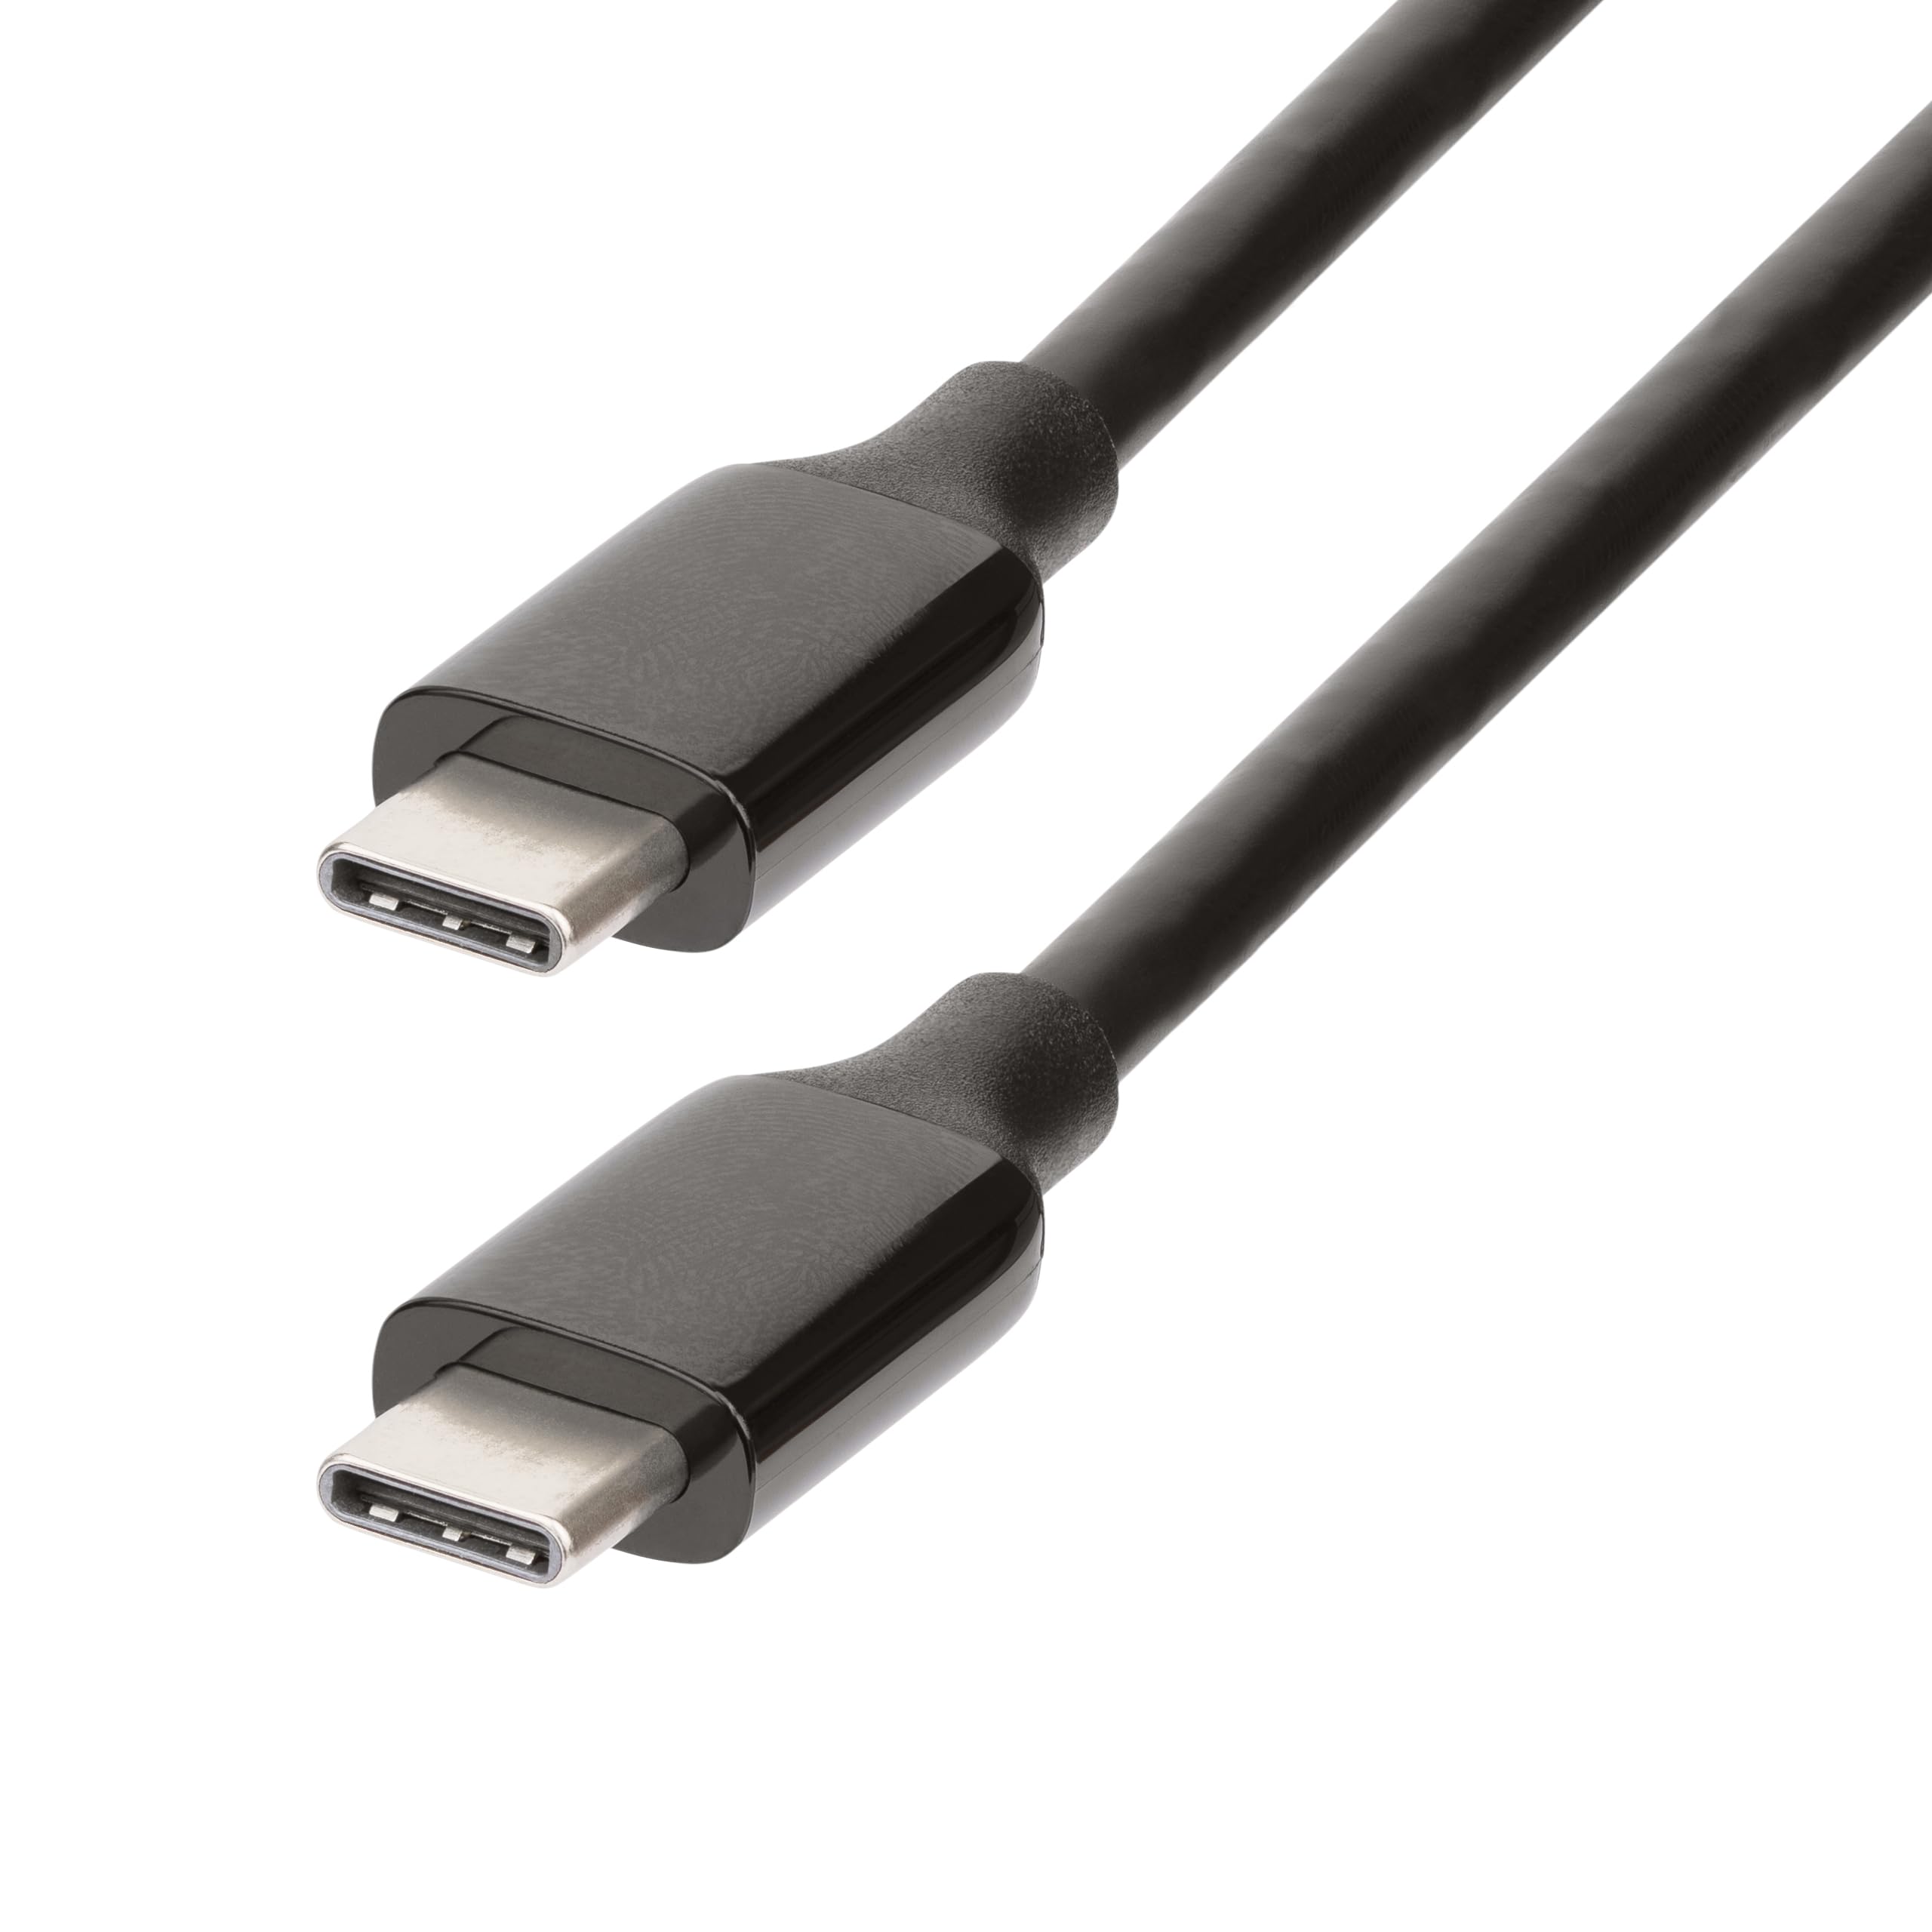 STARTECH-UCC-3M-10G-USB-CABLE